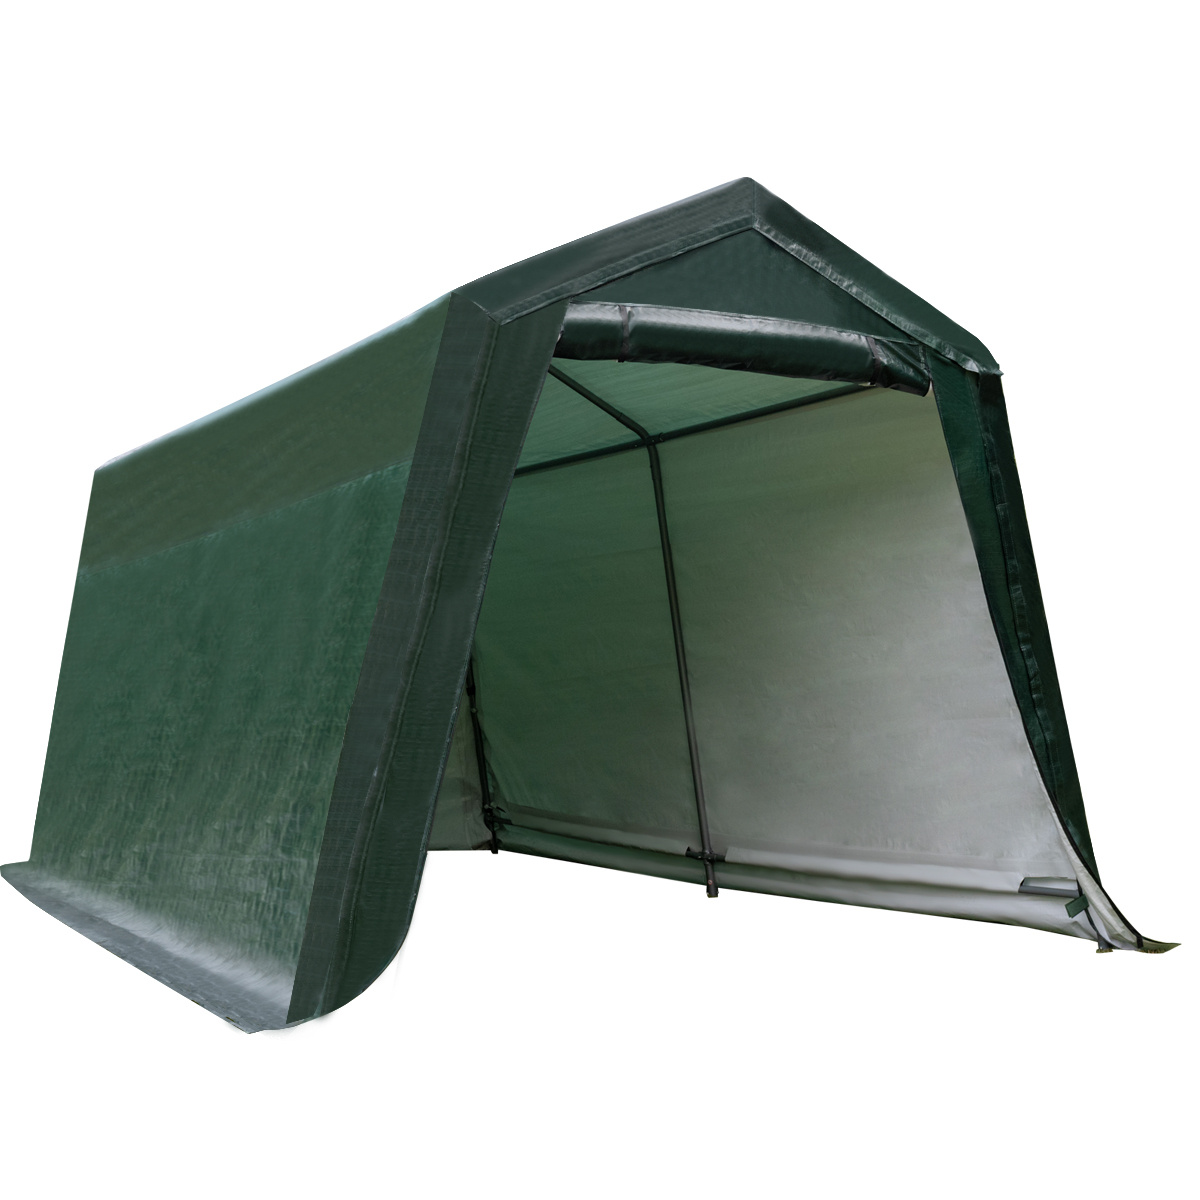 

Lifezeal 10'x10' Patio Tent Carport Storage Shelter Shed Car Canopy Heavy Duty Green